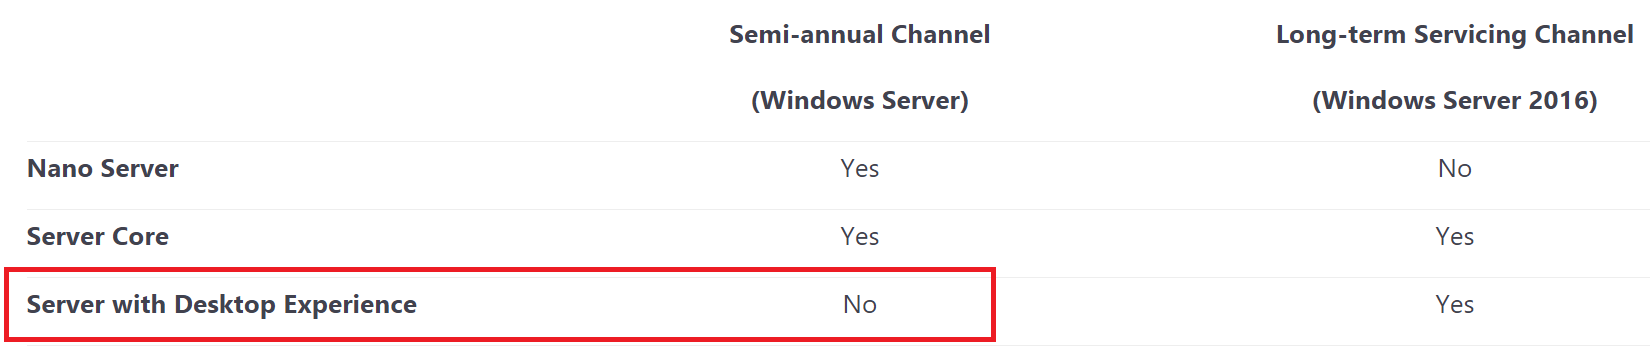 Support for Semi-Annual Channel and Long-term Servicing Channel with WS2016 [Image Credit: Microsoft]